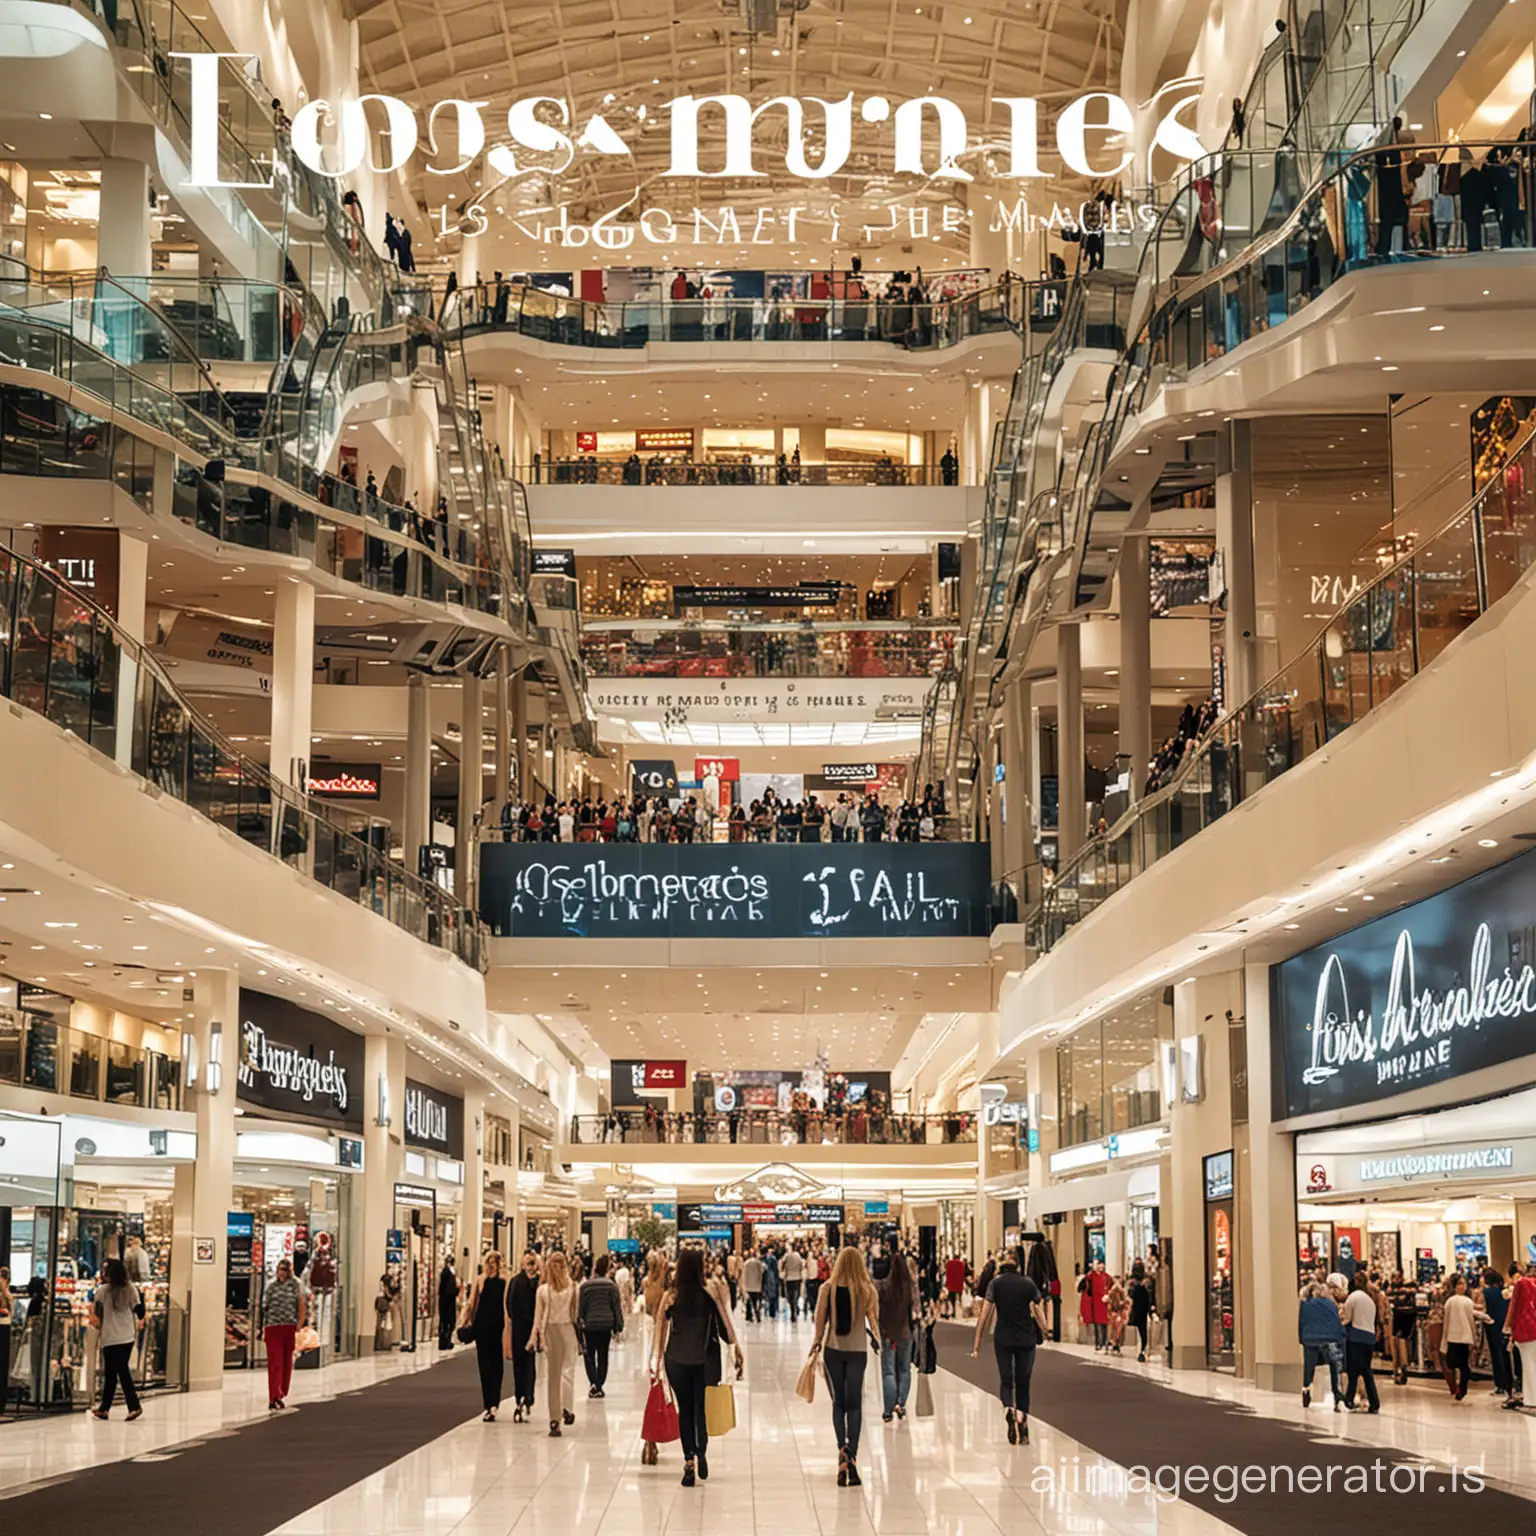 Los-Angeles-Top-10-Shopping-Malls-Vibrant-Scenes-of-Shoppers-and-Fashion-Trends